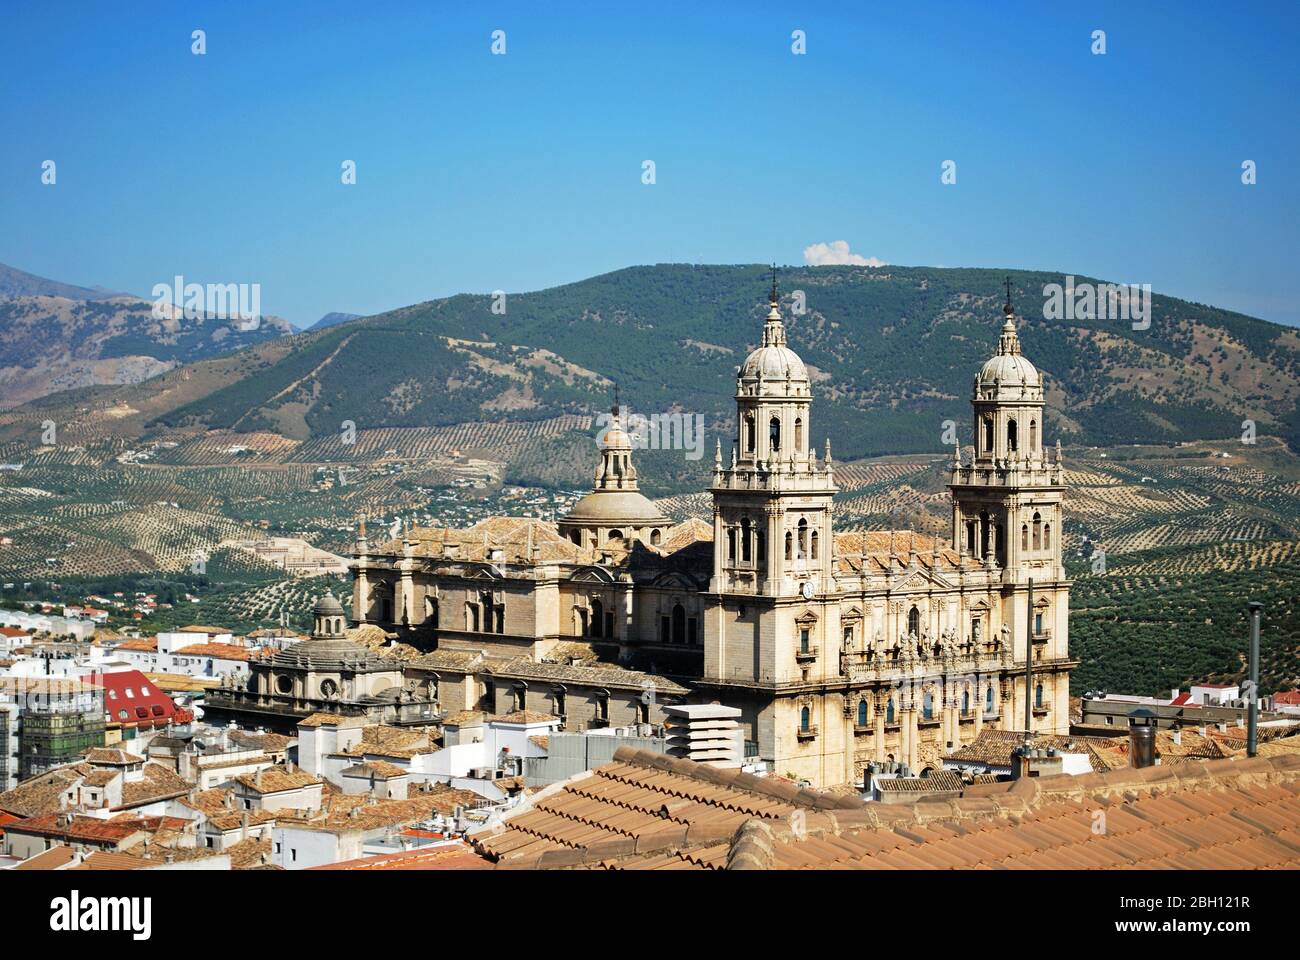 Elevated view of the Cathedral with olive groves to the rear, Jaen, Jaen Province, Andalucia, Spain, Western Europe Stock Photo